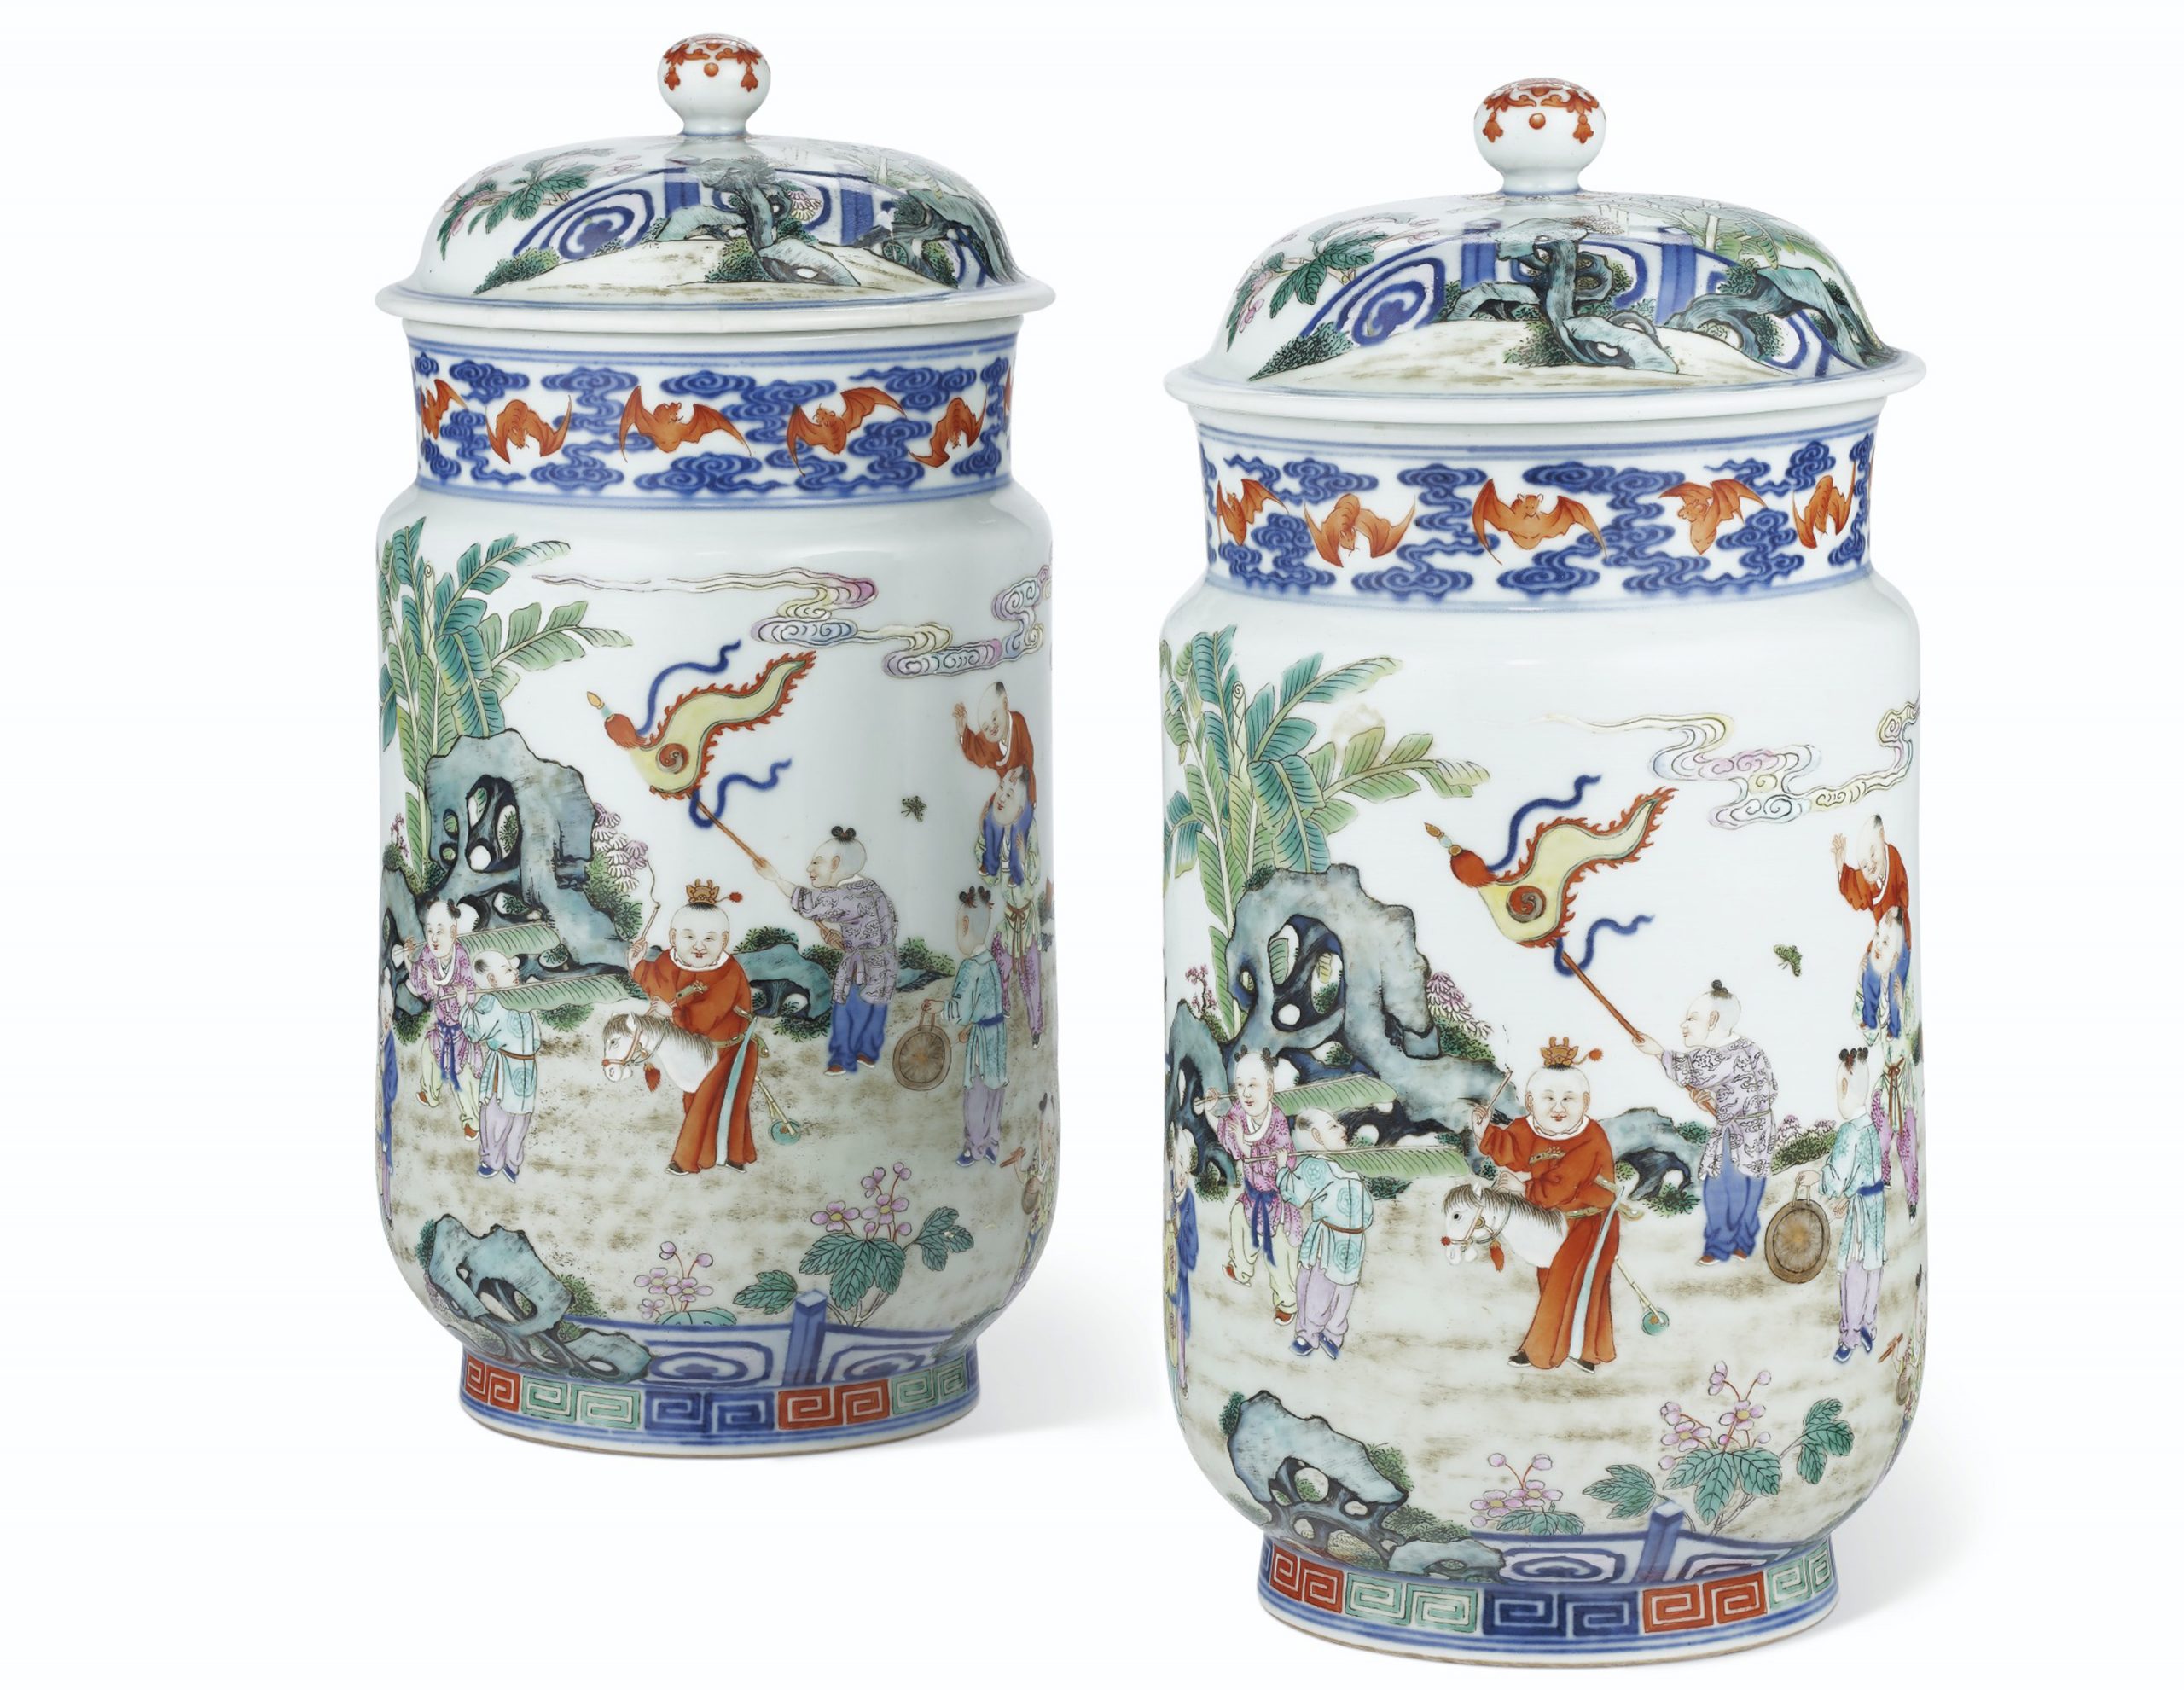 A VERY RARE PAIR OF FAMILLE ROSE 'BOYS' JARS AND COVERS